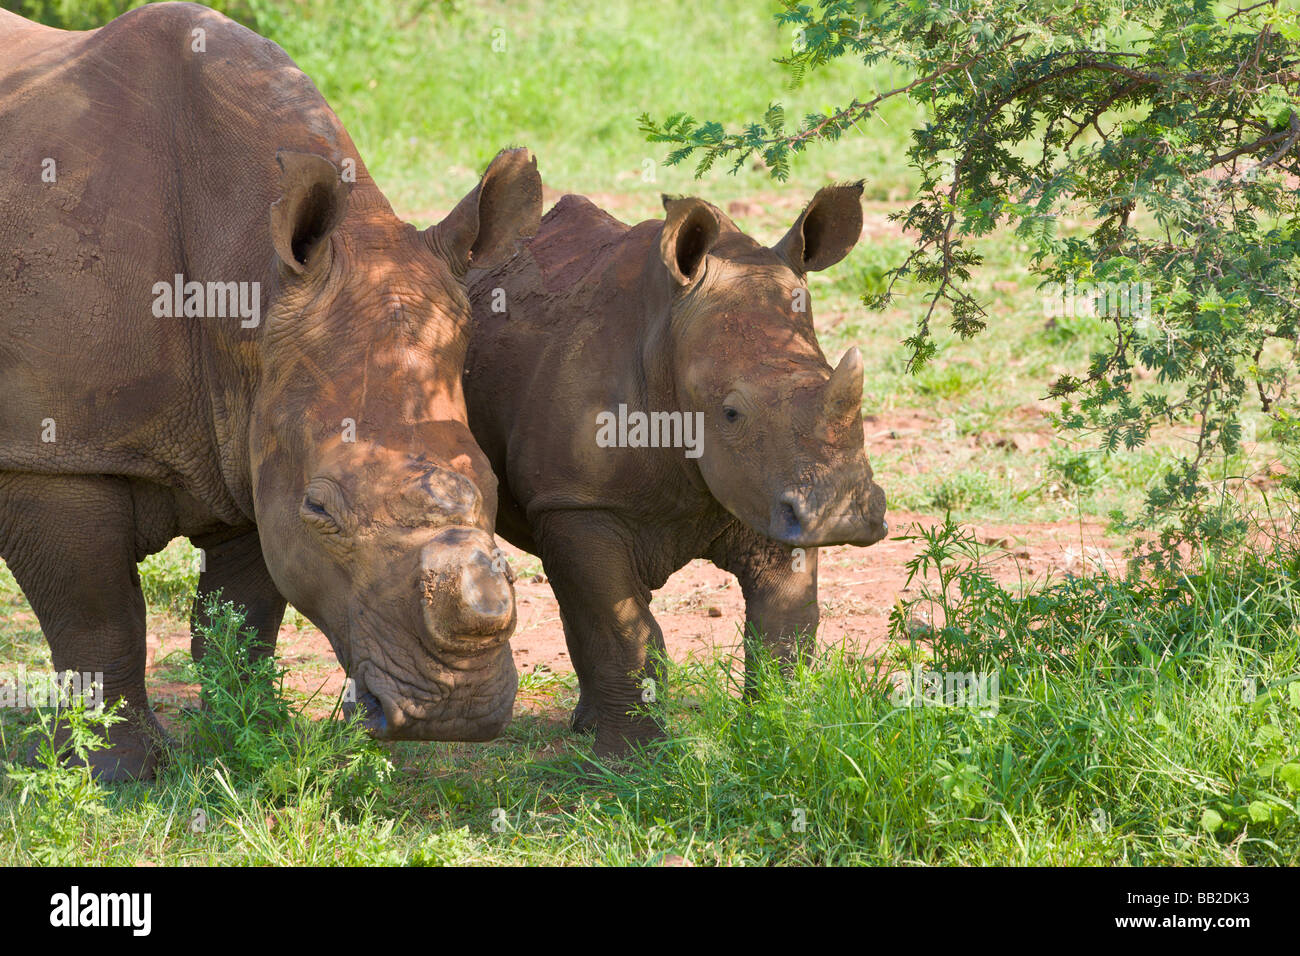 White rhinos, Ceratotherium simum, horn removed as protection against poaching, 'South Africa' Stock Photo